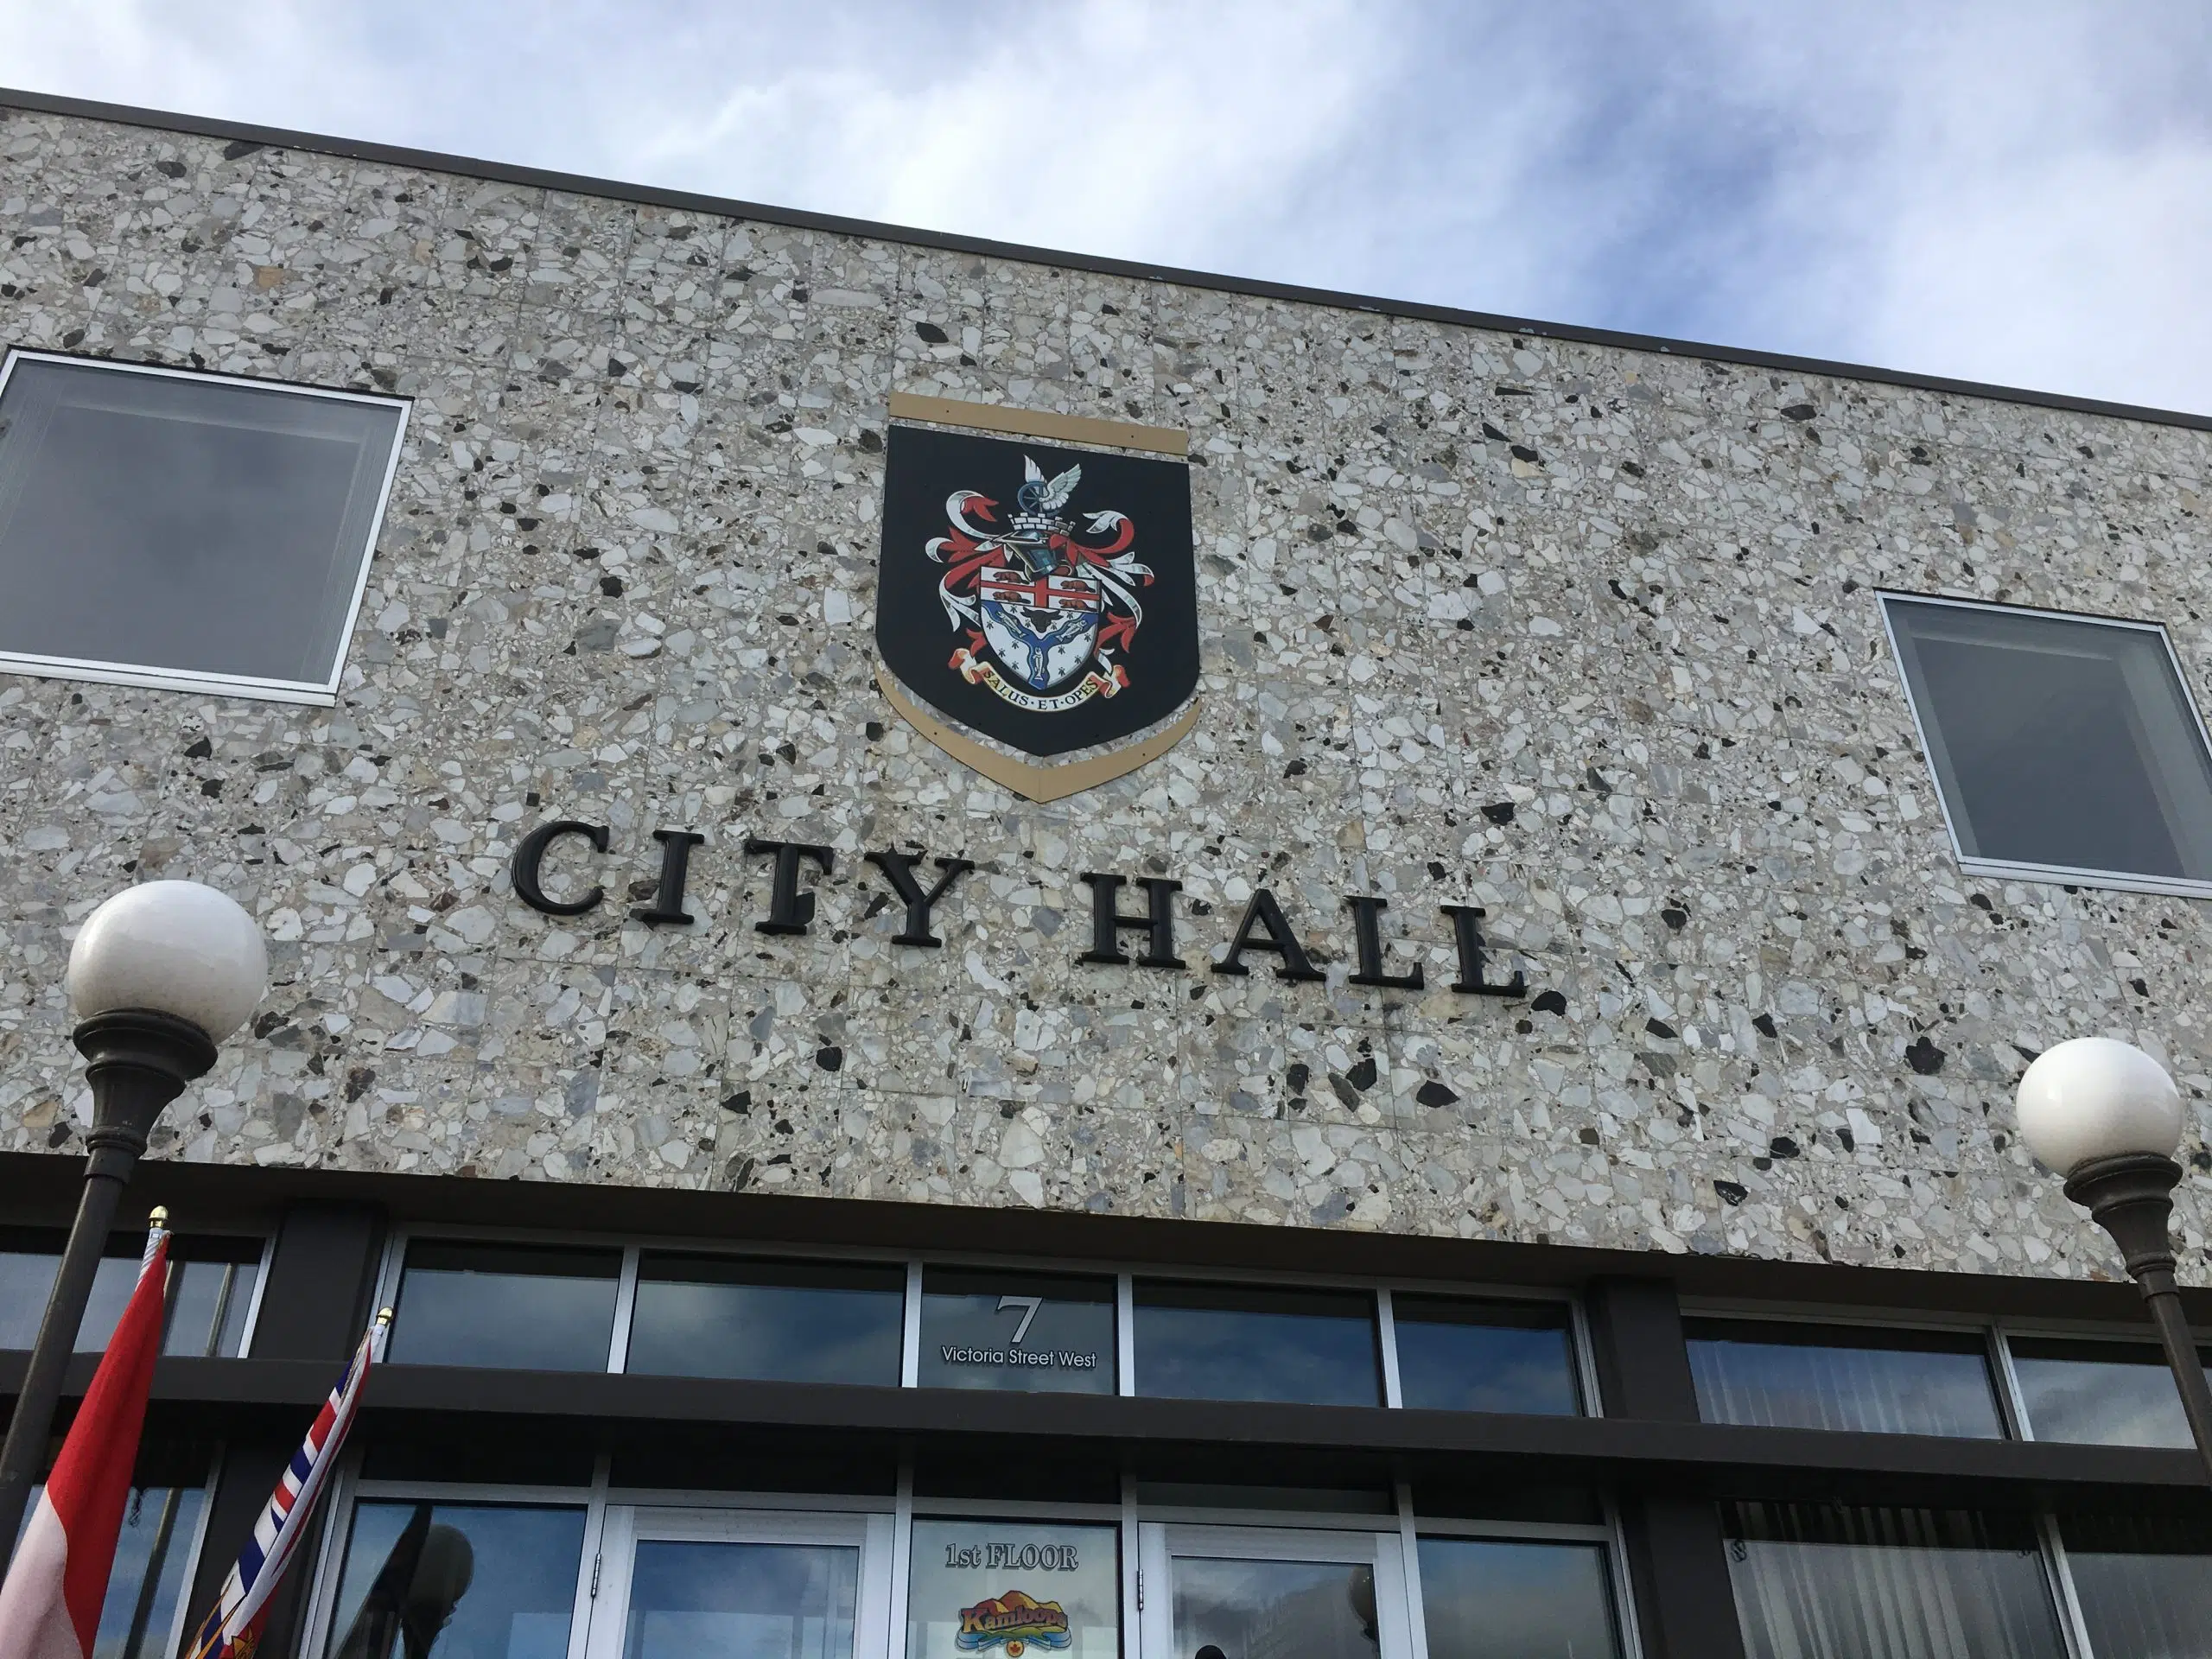 No change in verdict from Kamloops Council after rejecting rezoning application from Culos Developments